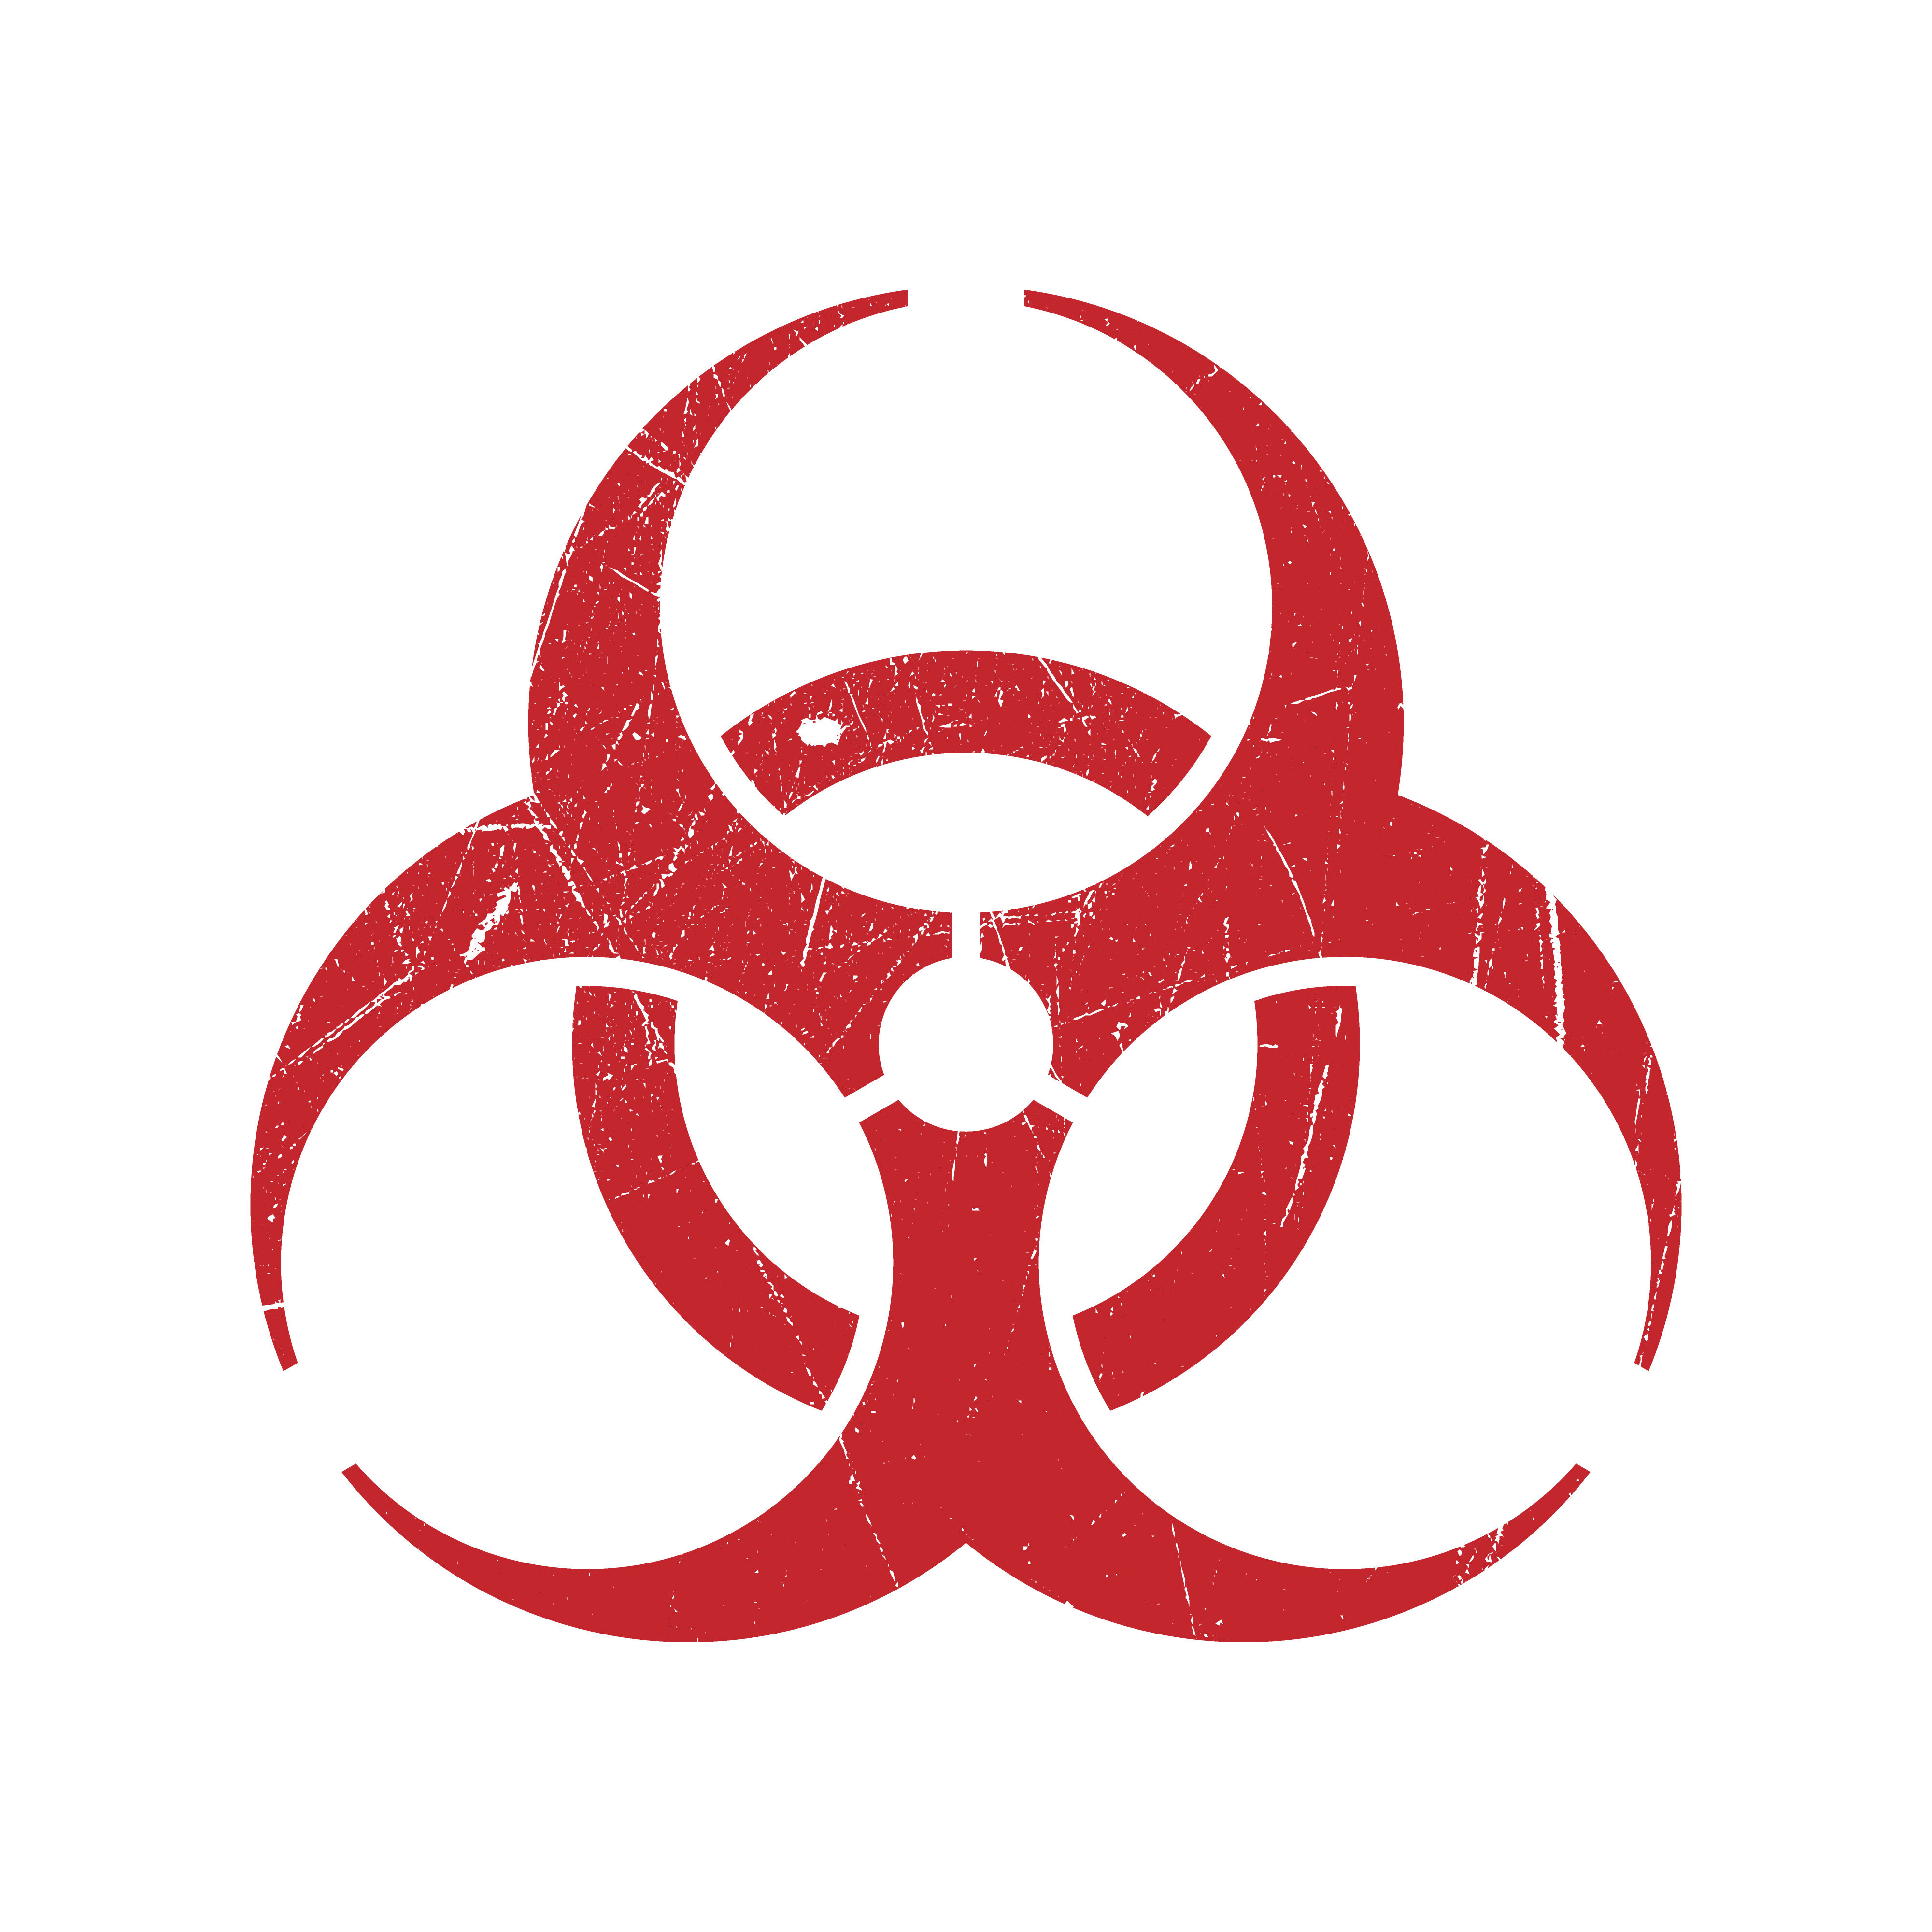 Grunge styled biohazard symbol. Biological warning sign. Grunge styled biohazard symbol. Corona virus vector icon. Template for your design